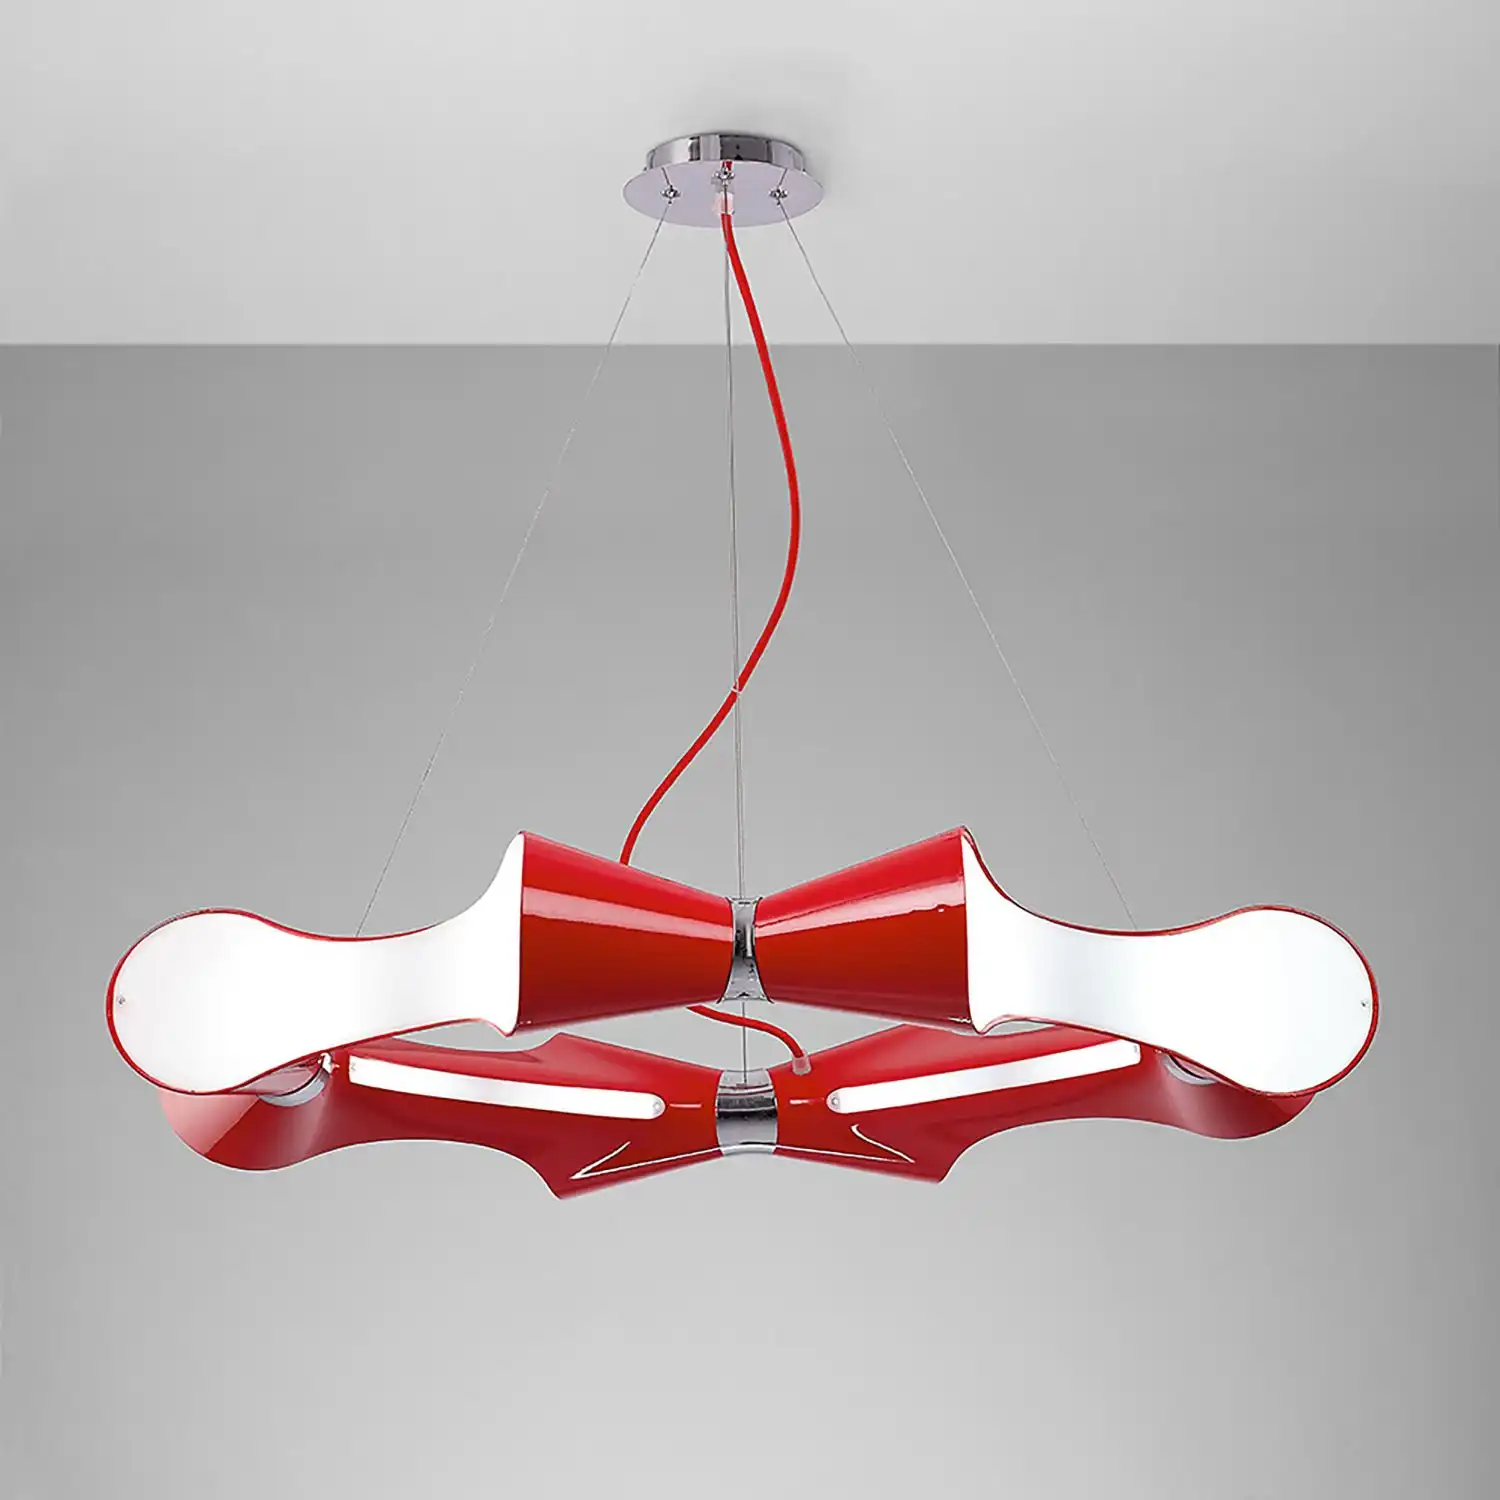 Ora Pendant 8 Flat Round Light E27, Gloss Red White Acrylic Polished Chrome, CFL Lamps INCLUDED